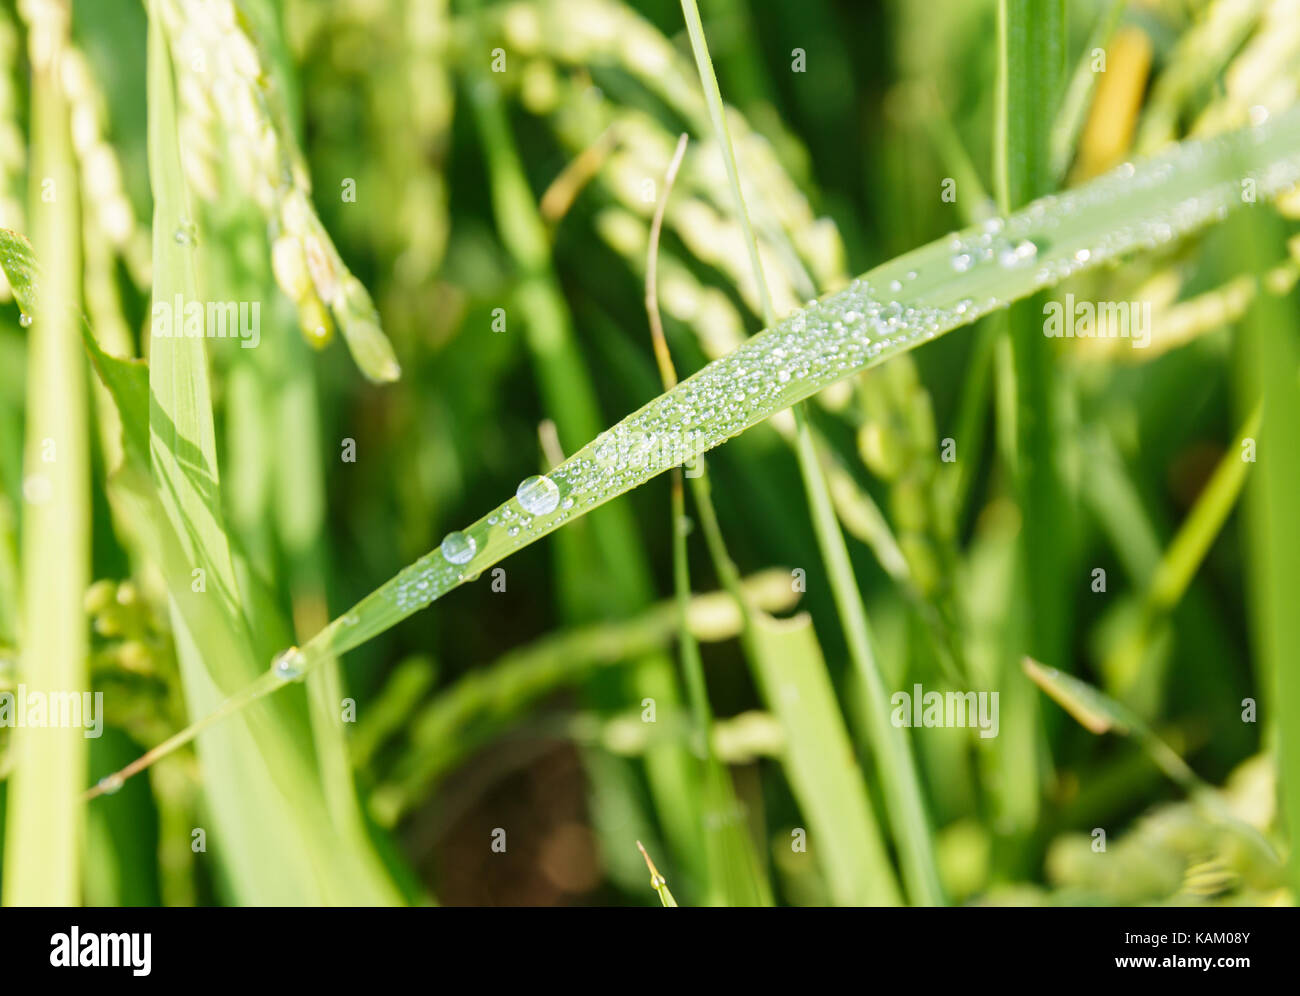 rice field in the morning Stock Photo